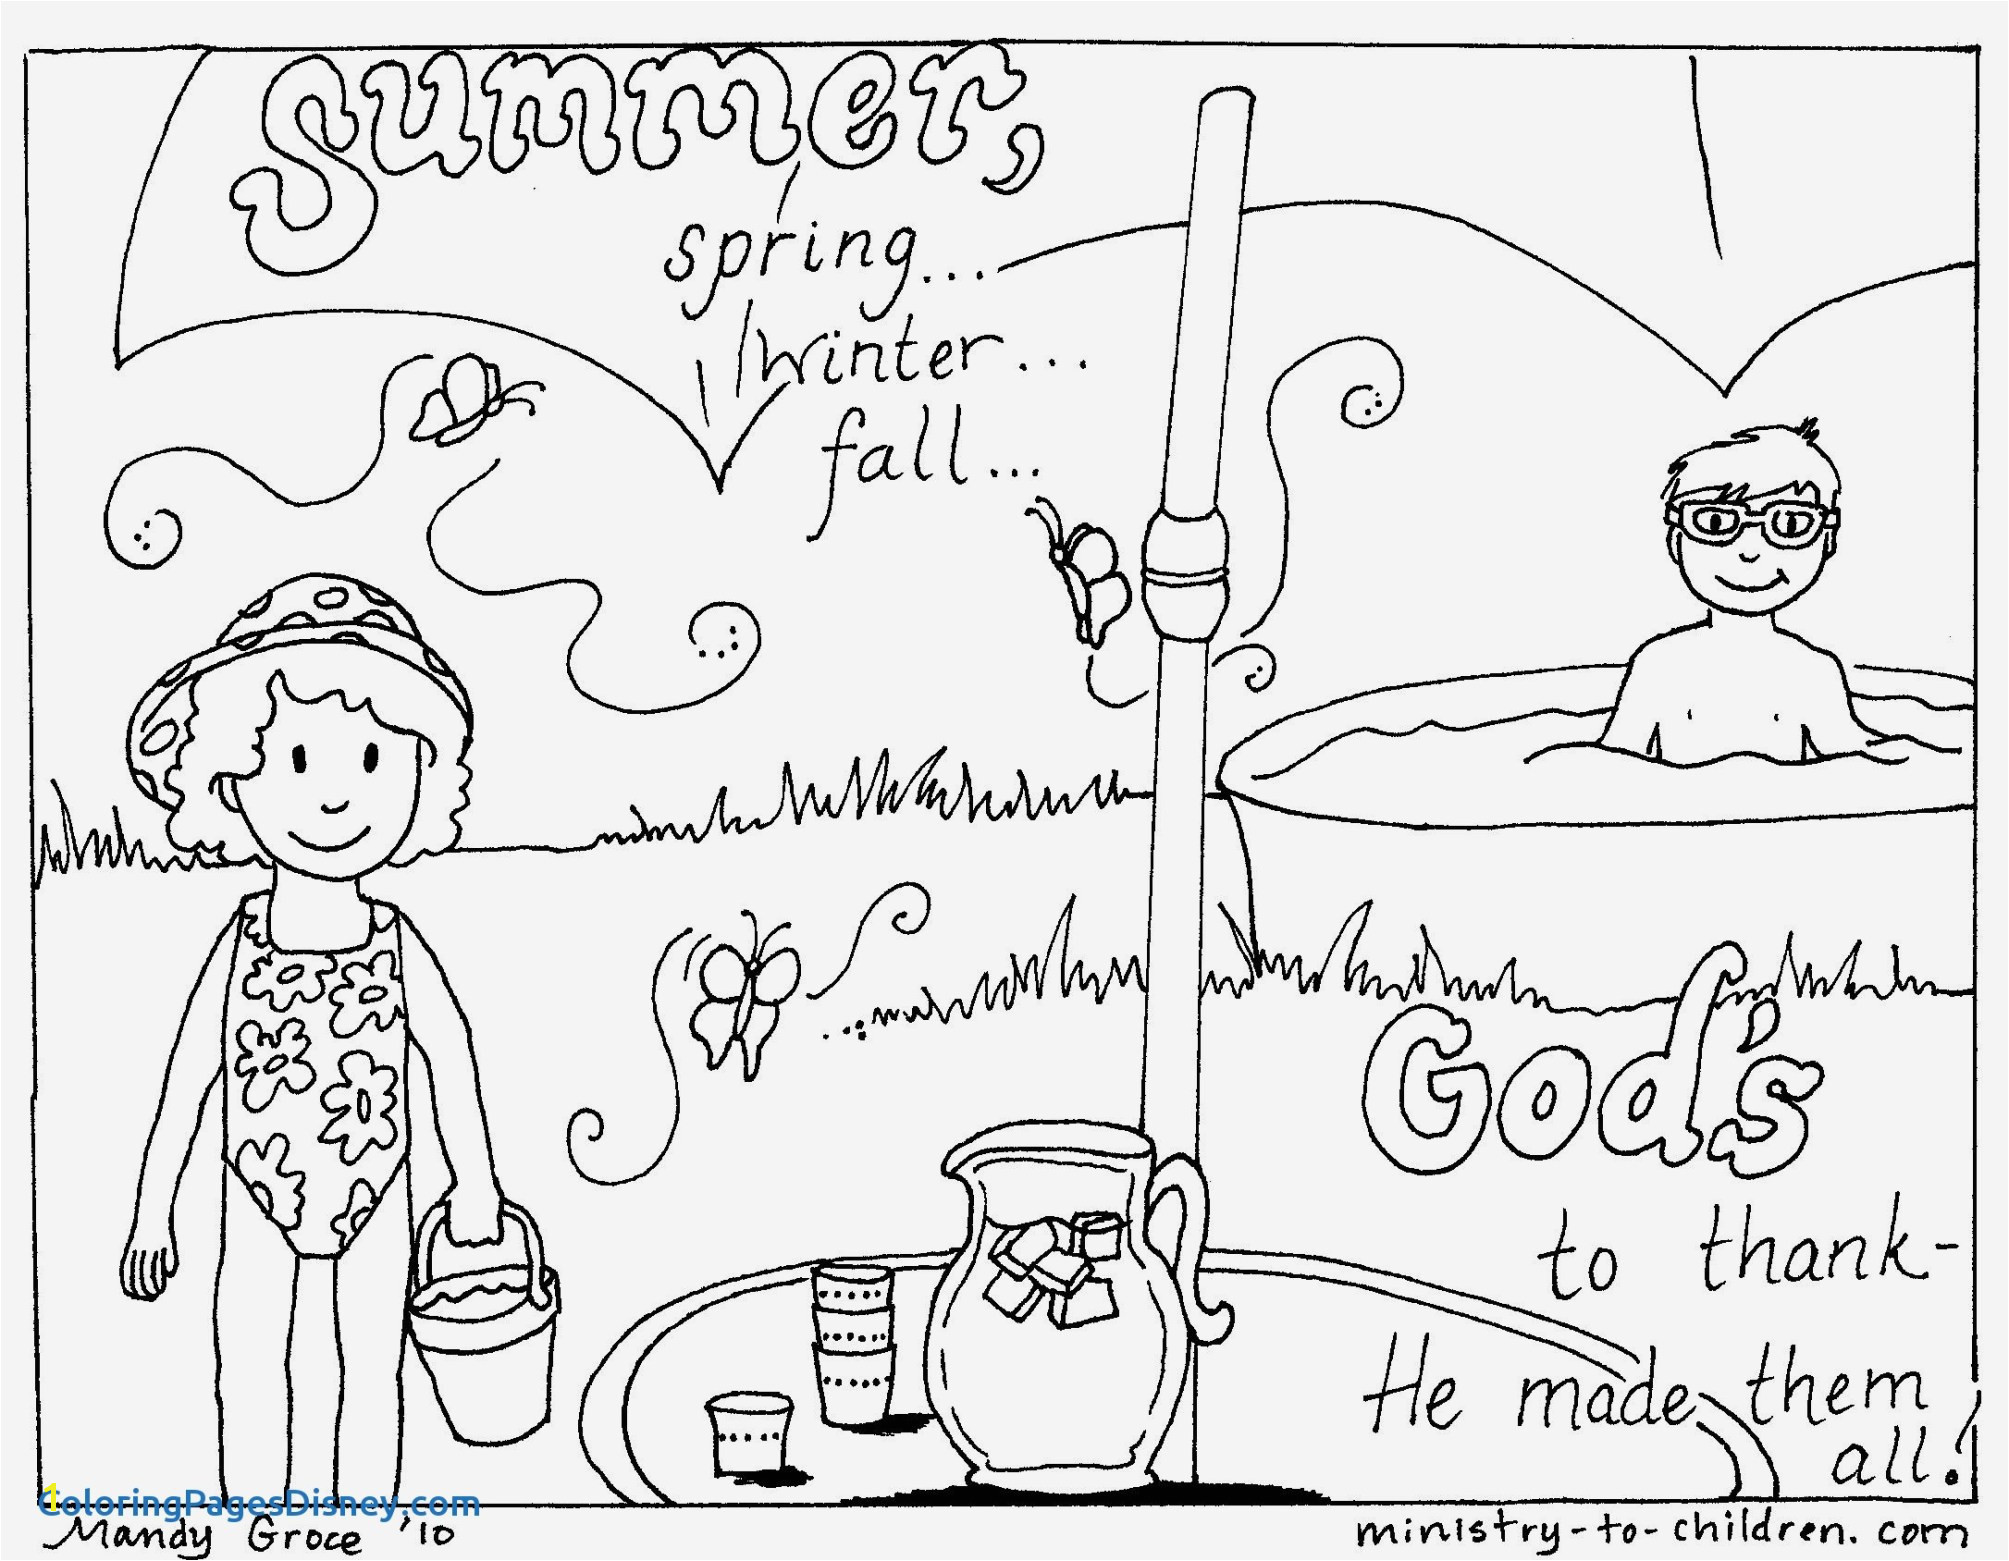 Free Downloadable Coloring Pages From Disney New Summer Coloring Pages Inspirational Free Downloadable Summer Fun